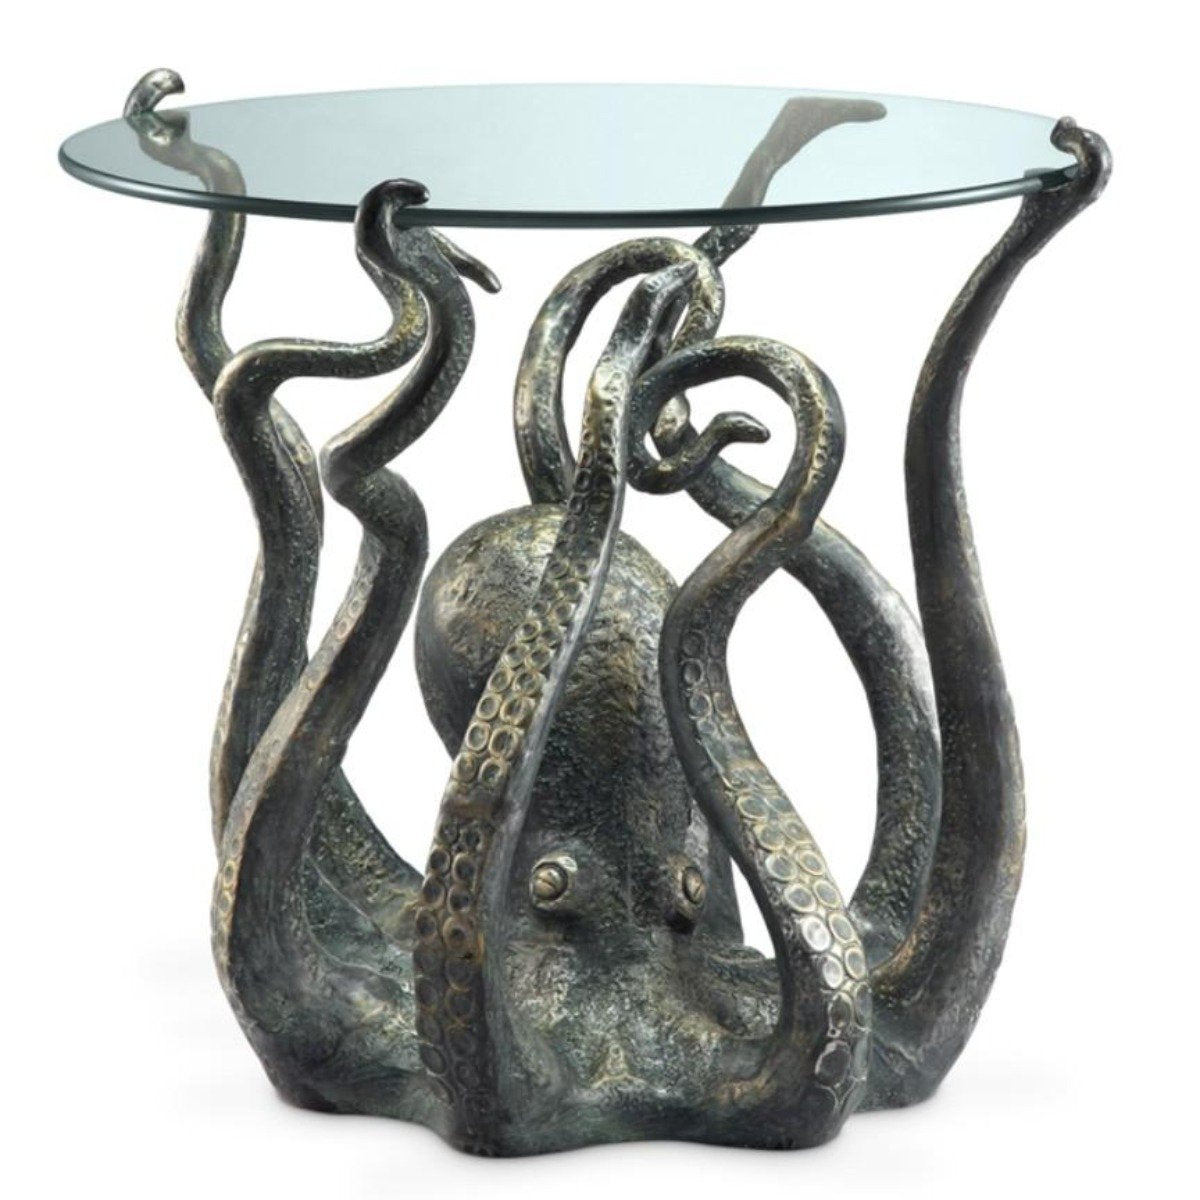 Octopus End Table-Decor | Iron Accents